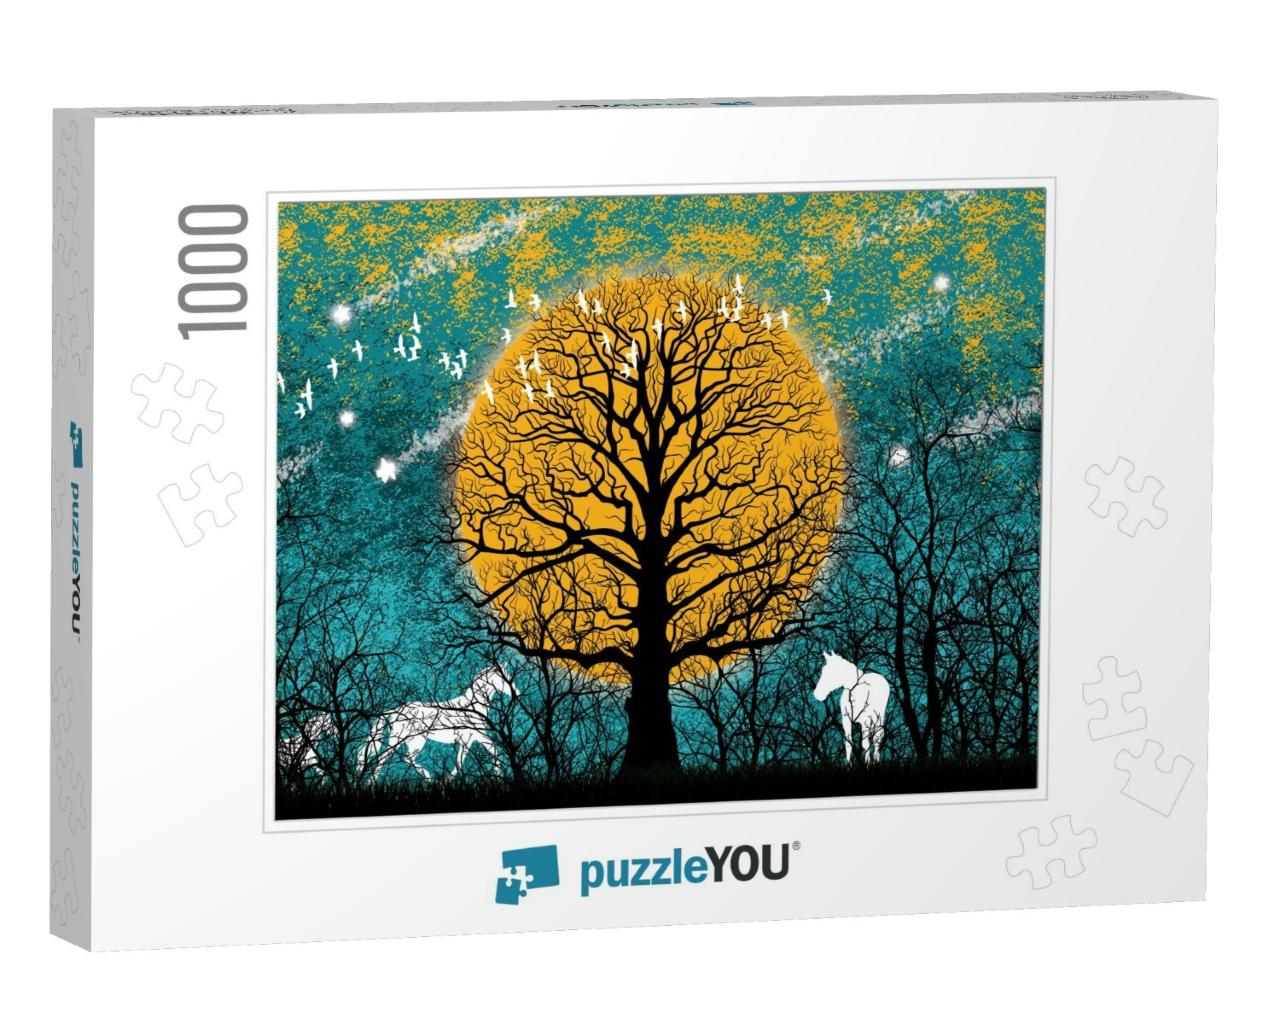 3D Illustration of Forest & White Horse. Luxurious Abstra... Jigsaw Puzzle with 1000 pieces